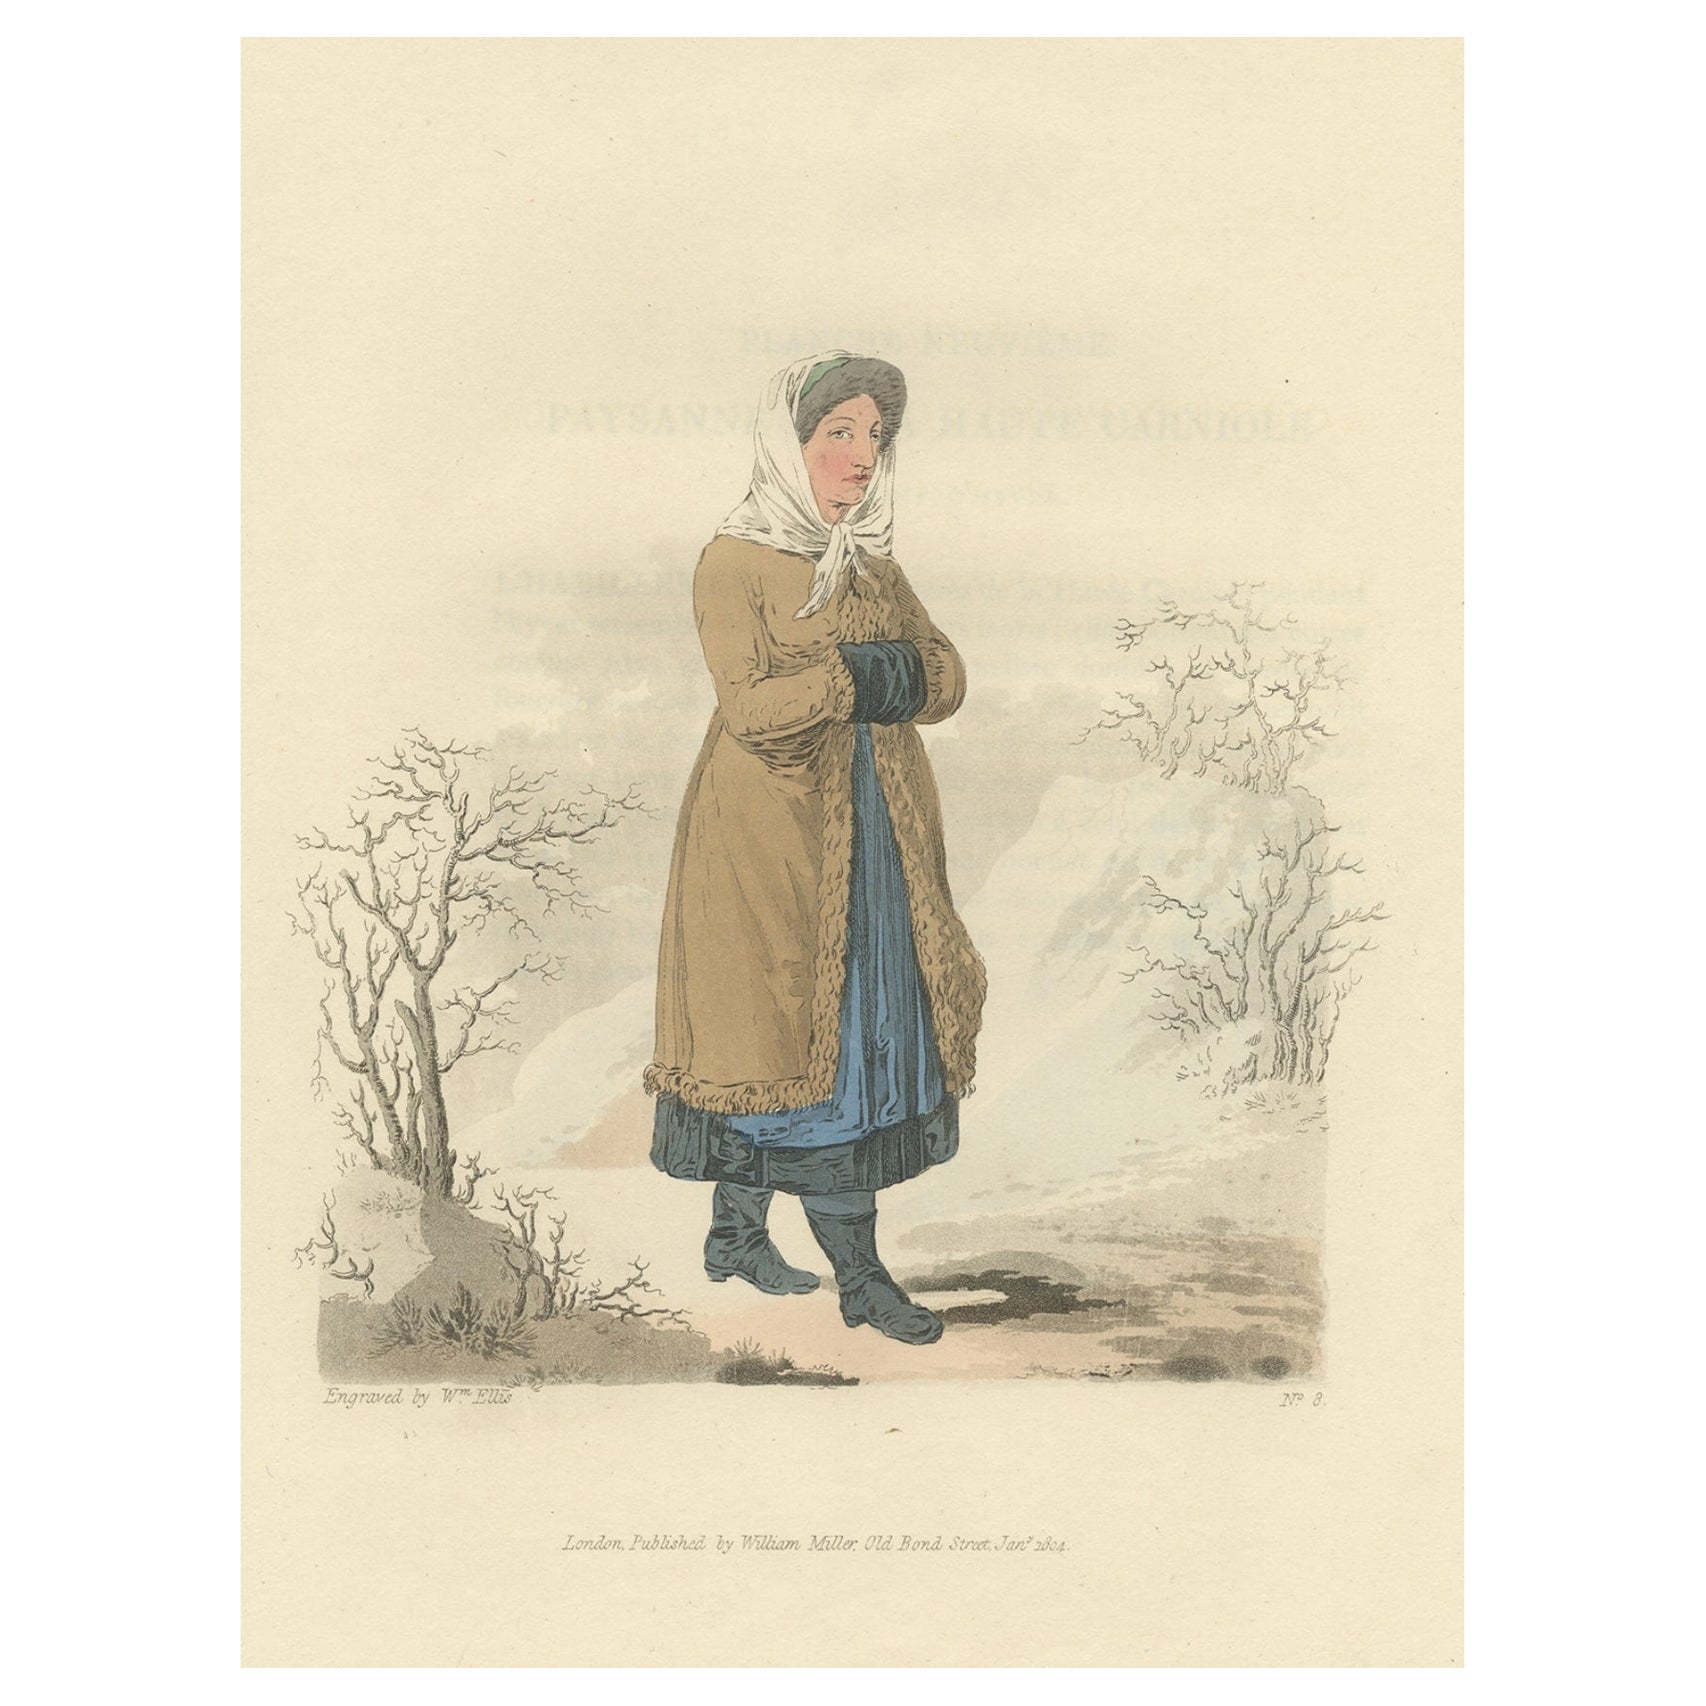 Old Print of a Countrywoman of Upper Carniola, Slovenia, Eastern Europe, 1804